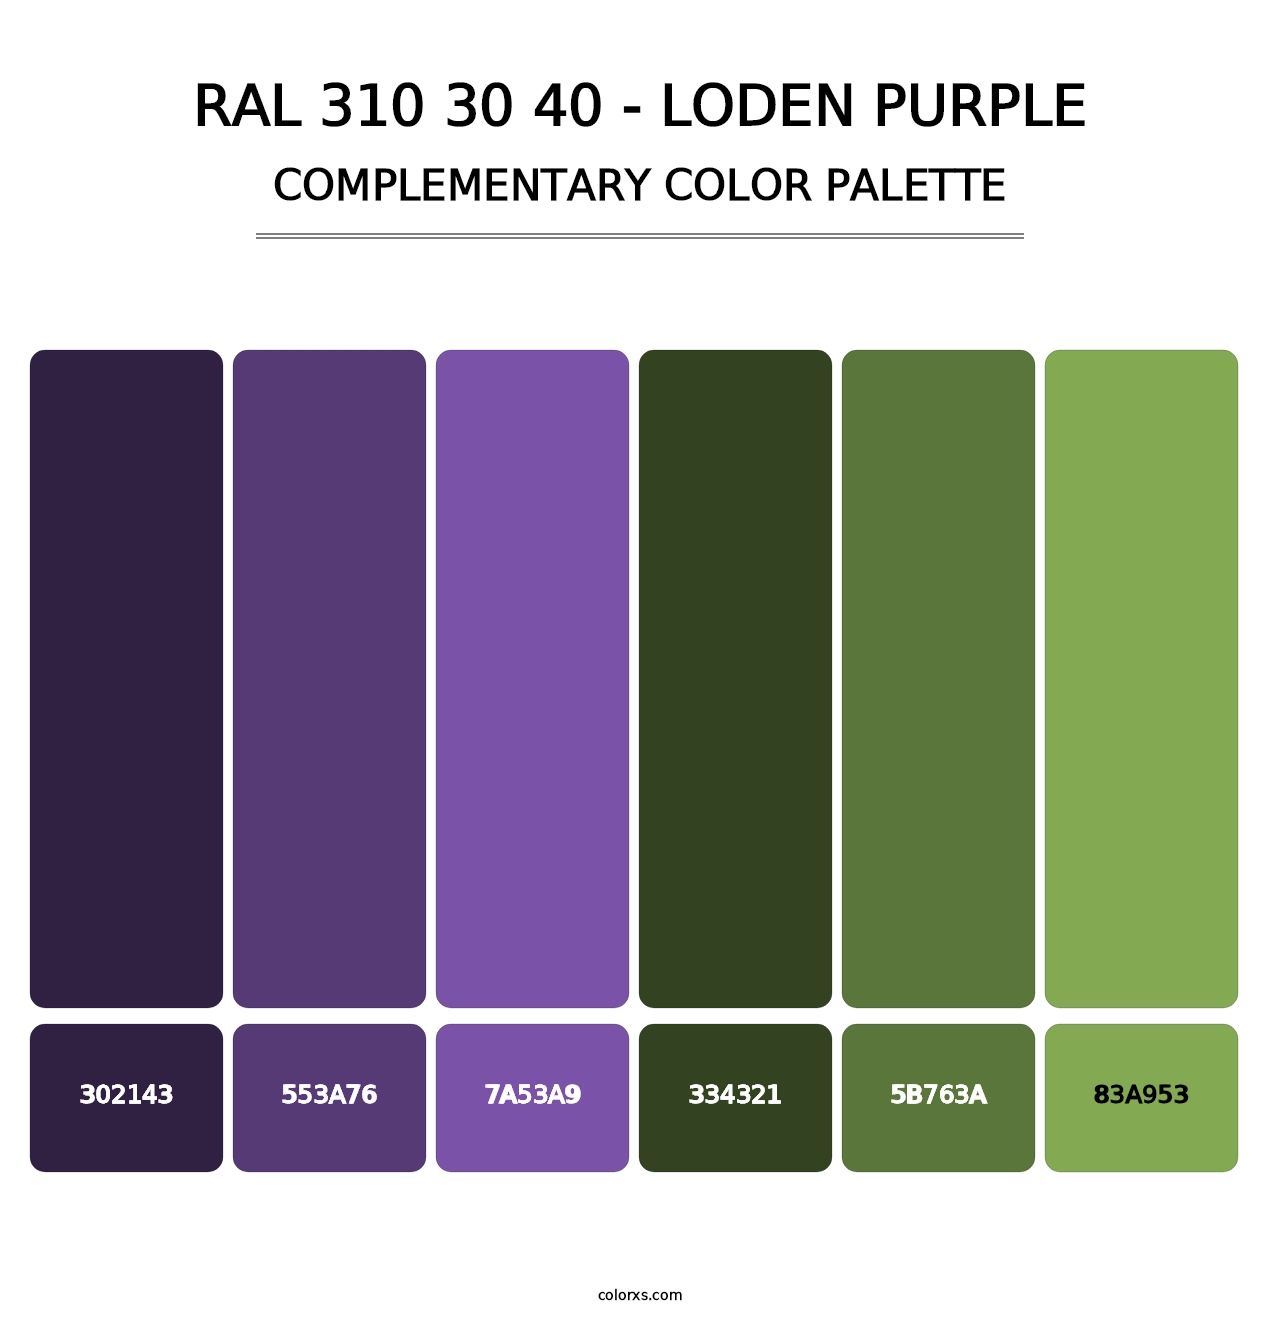 RAL 310 30 40 - Loden Purple - Complementary Color Palette